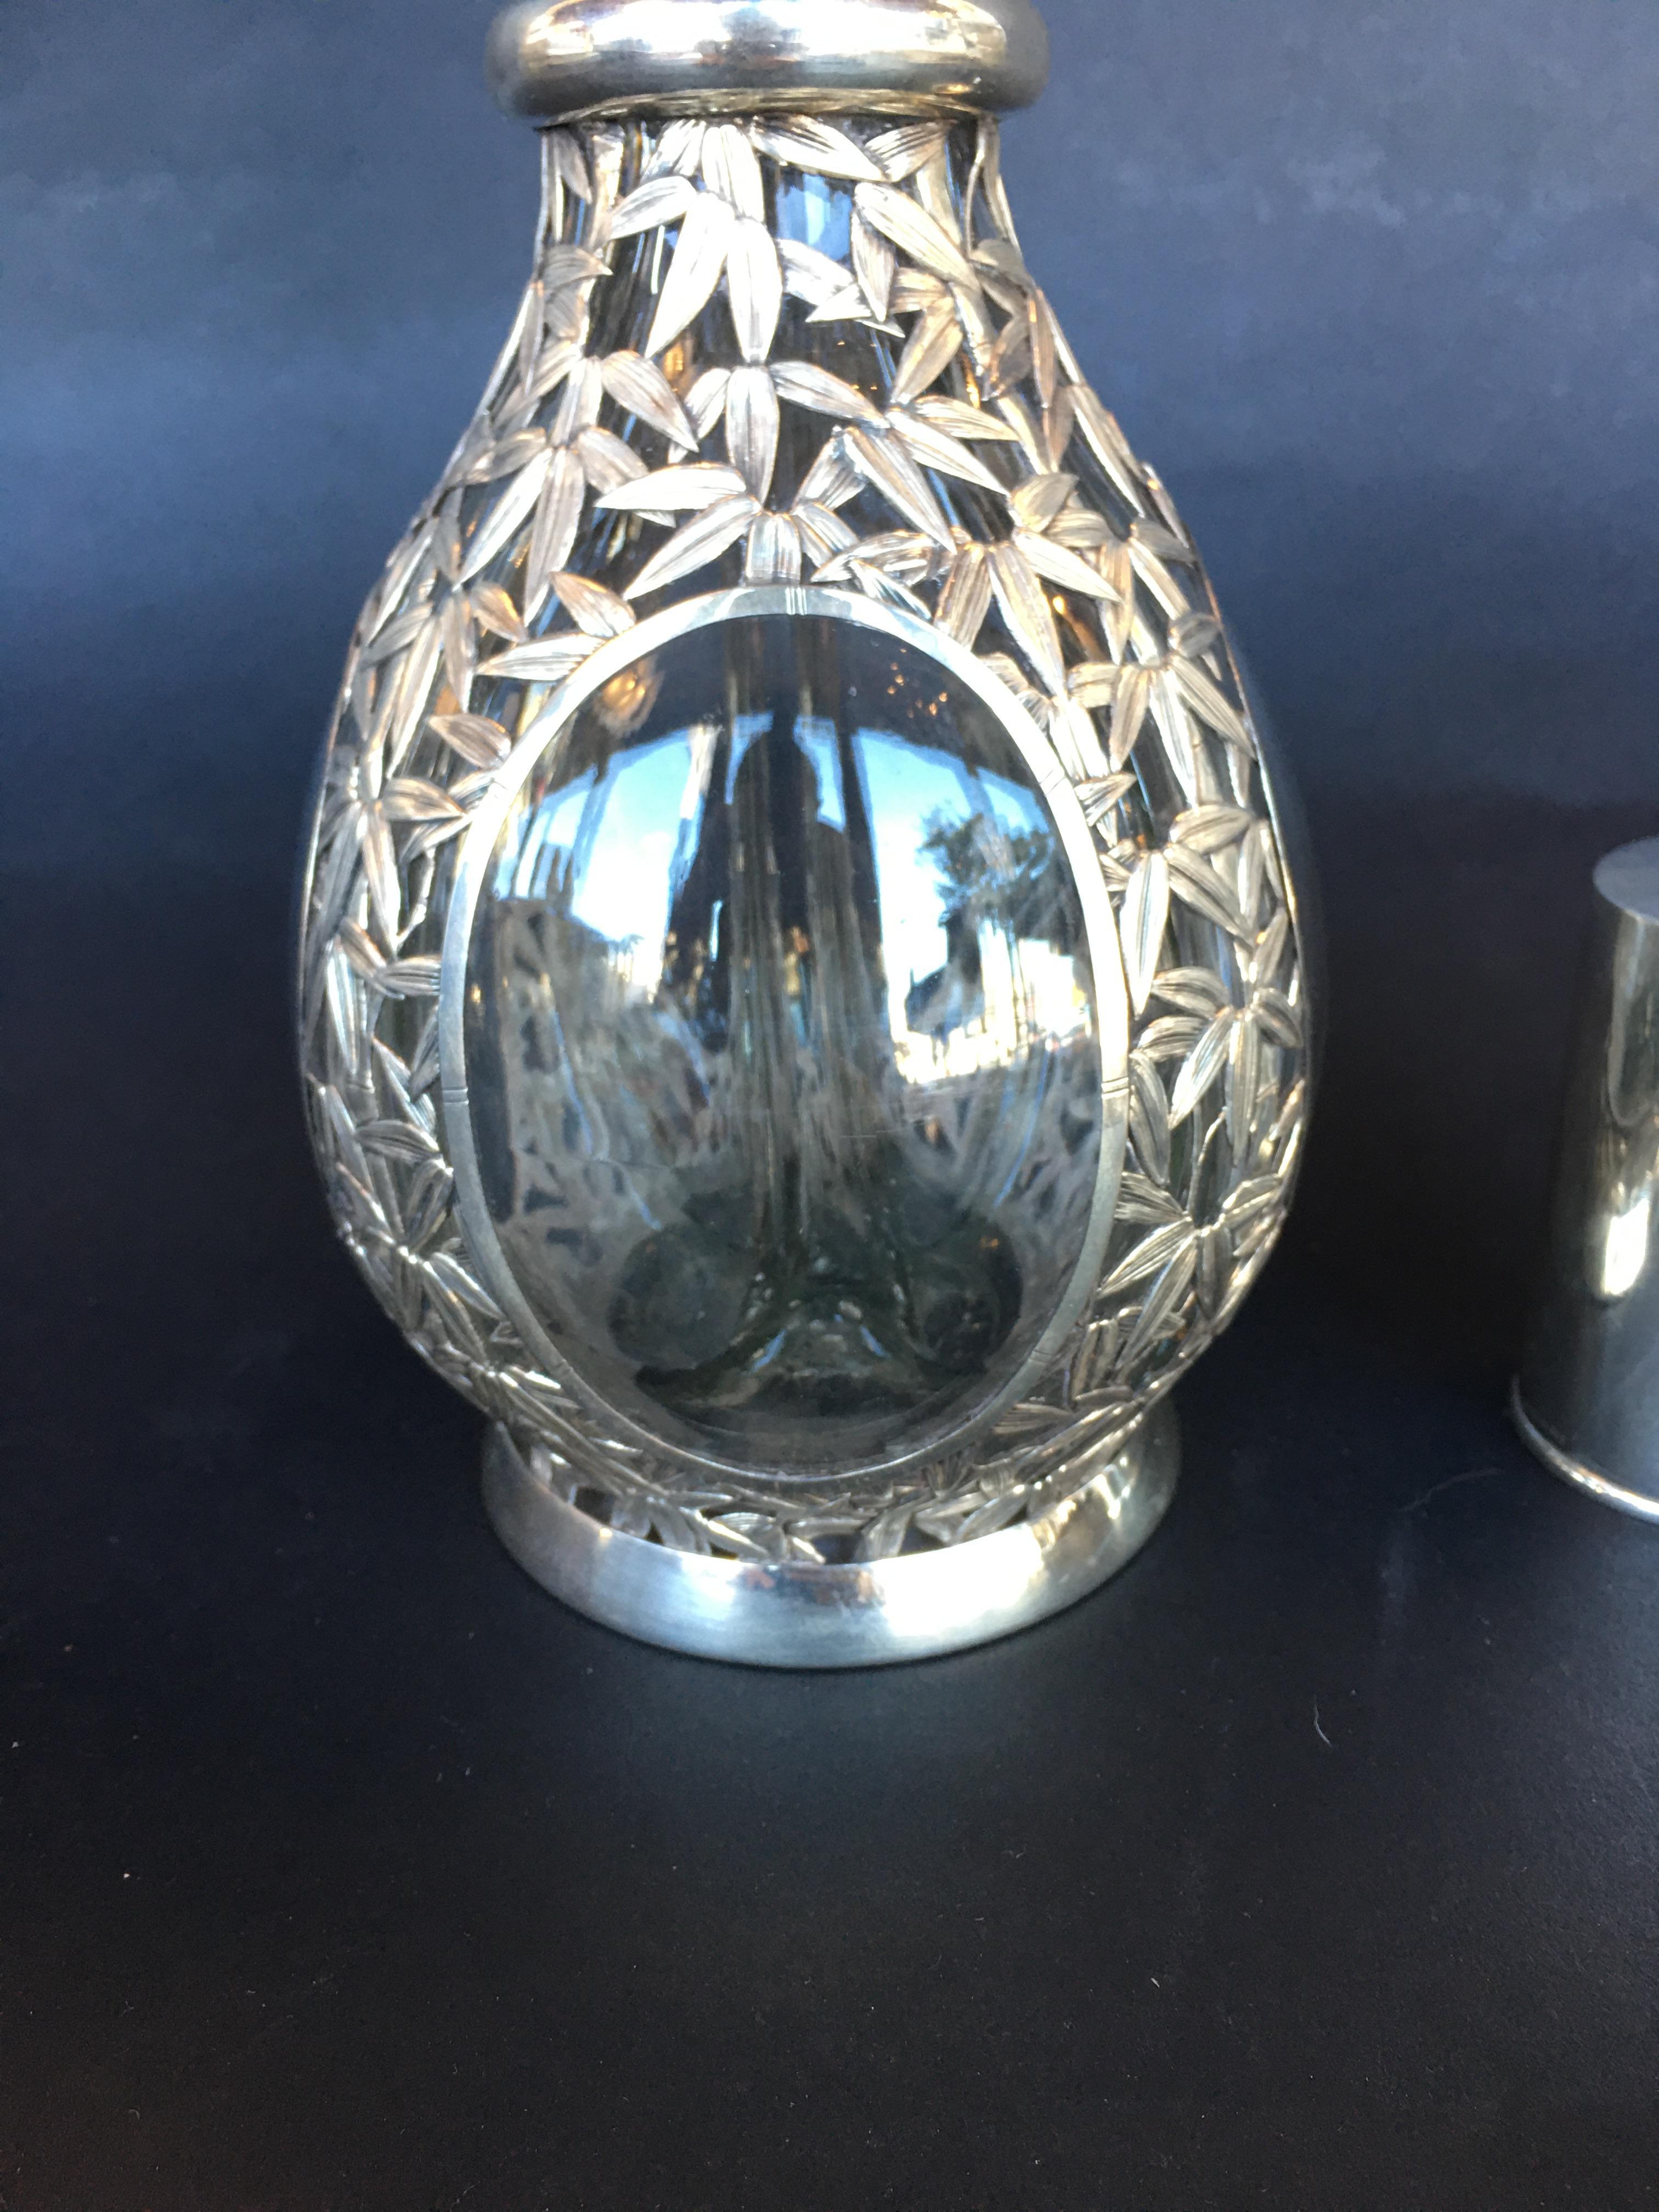 Sterling silver and glass decanter. The decanter has 4 different compartments.